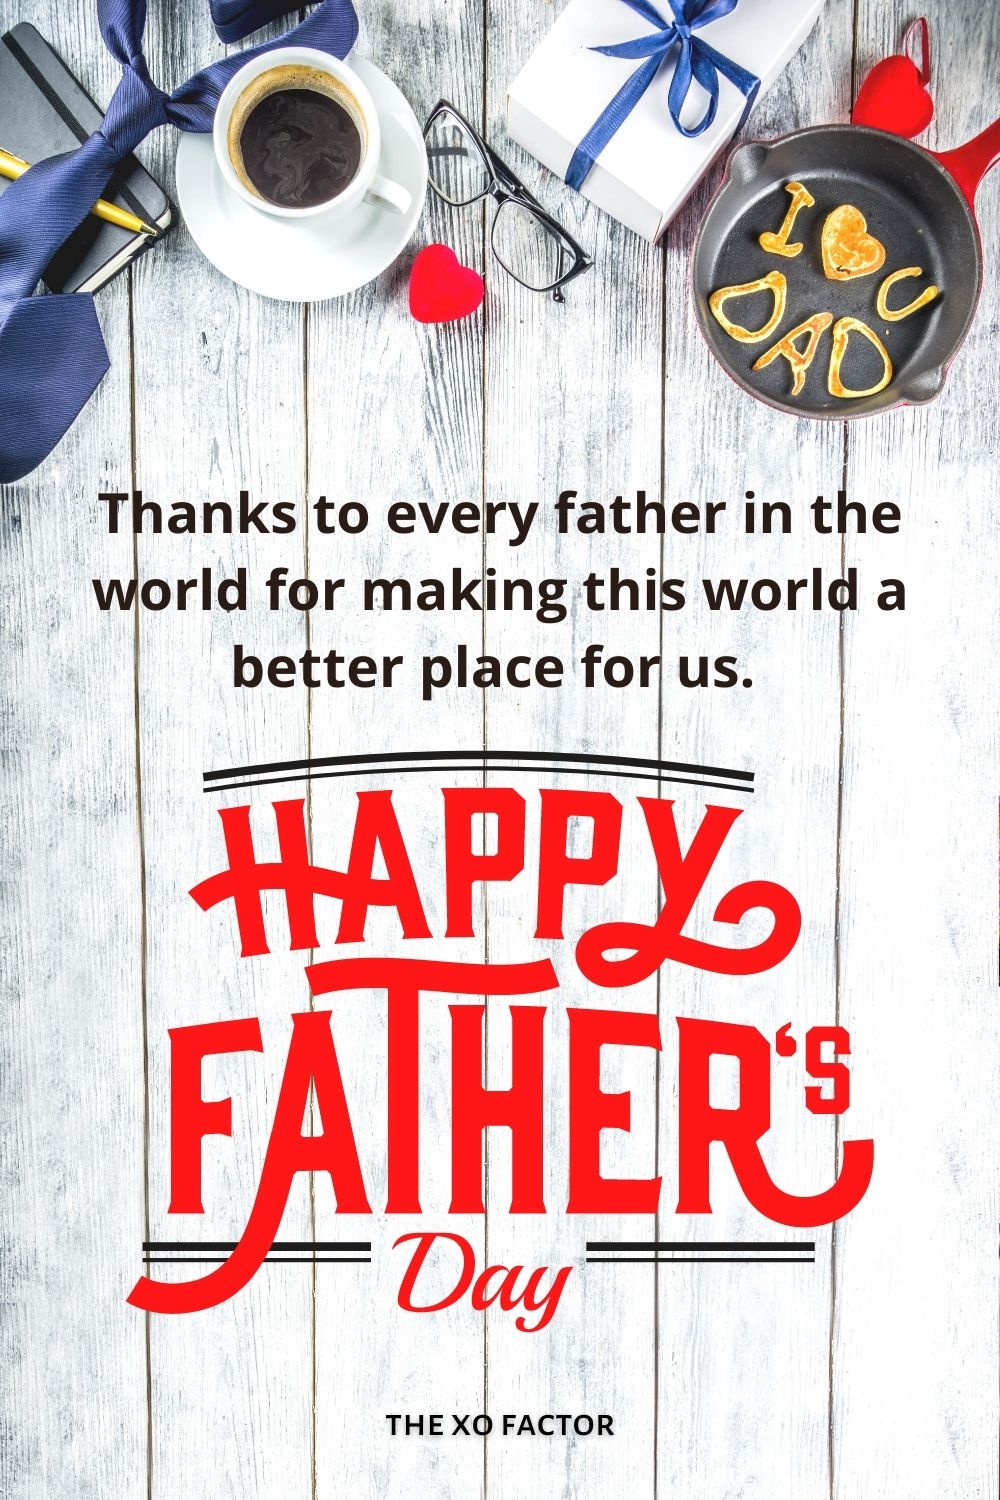 Thanks to every father in the world for making this world a better place for us. Happy Father’s Day!